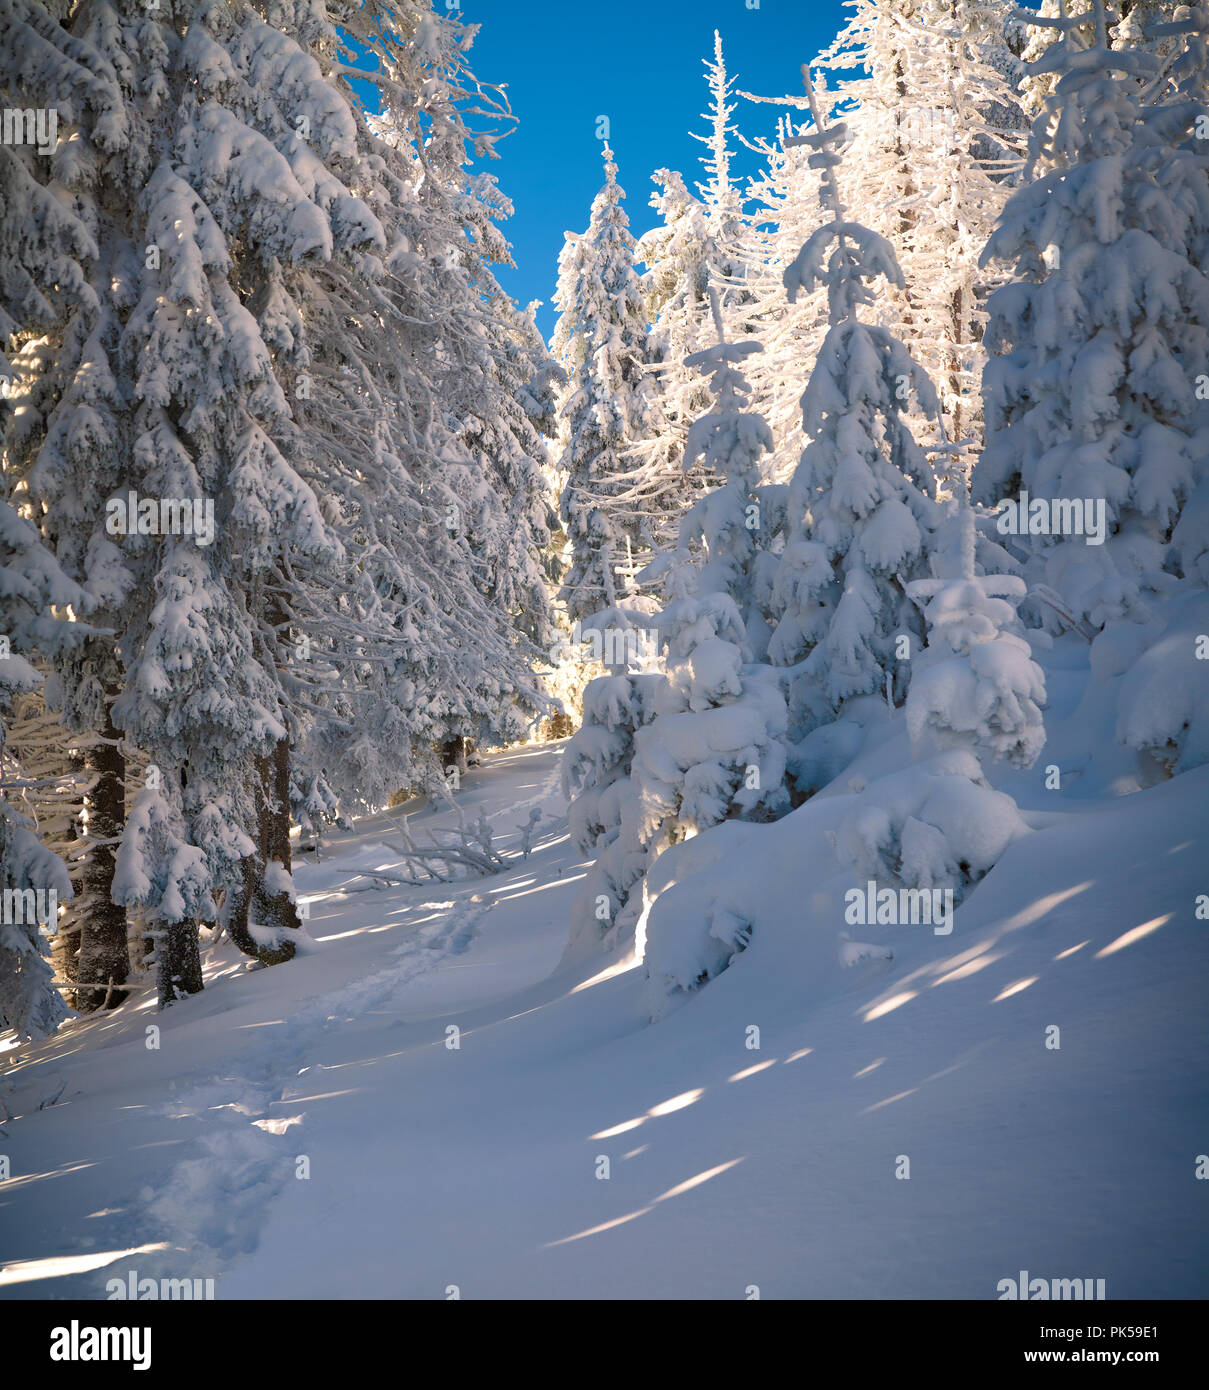 Sunny winter morning in the mountain forest. Happy New Year! Stock Photo